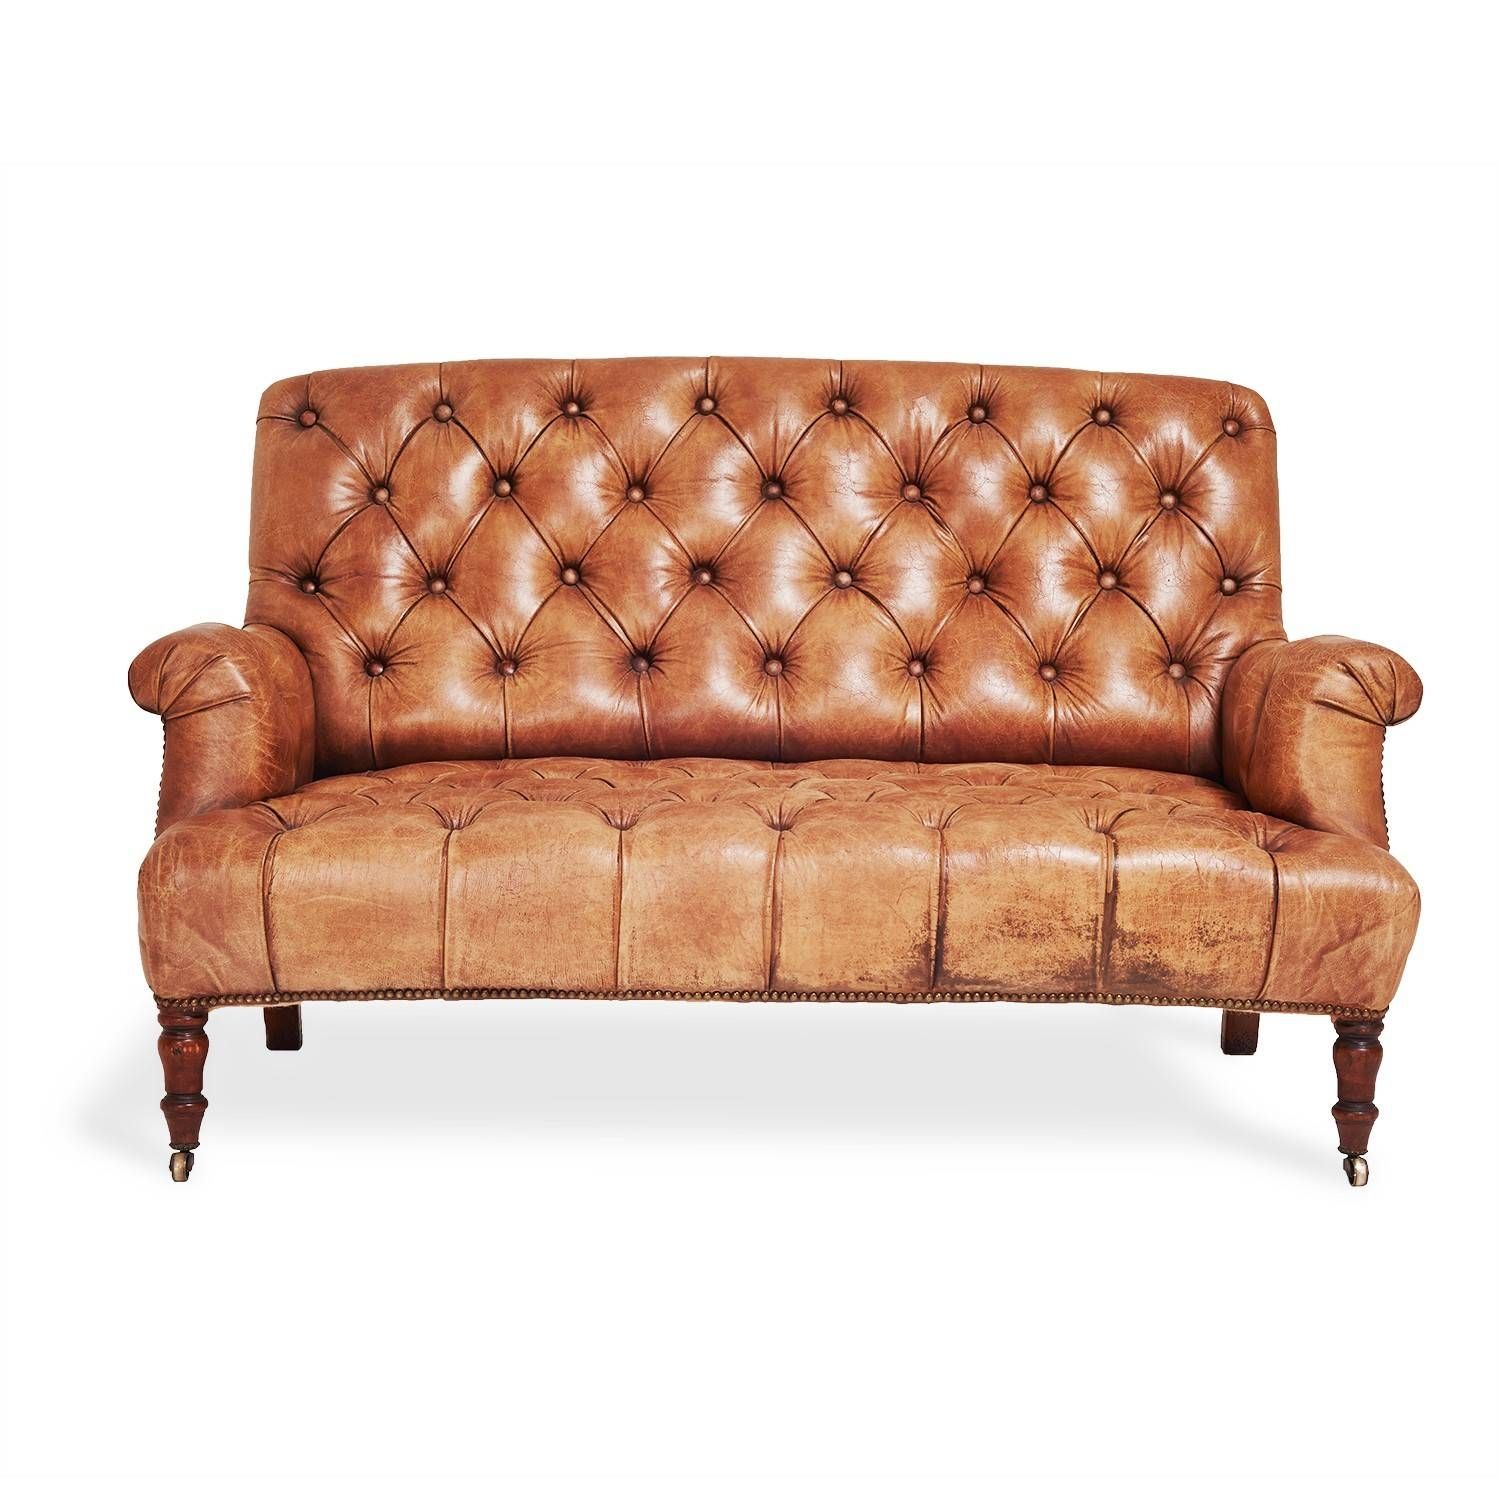 2 Seater Brown Leather Tufted Sofa With Wooden Legs For Small With Brown Leather Tufted Sofas (Photo 3 of 15)